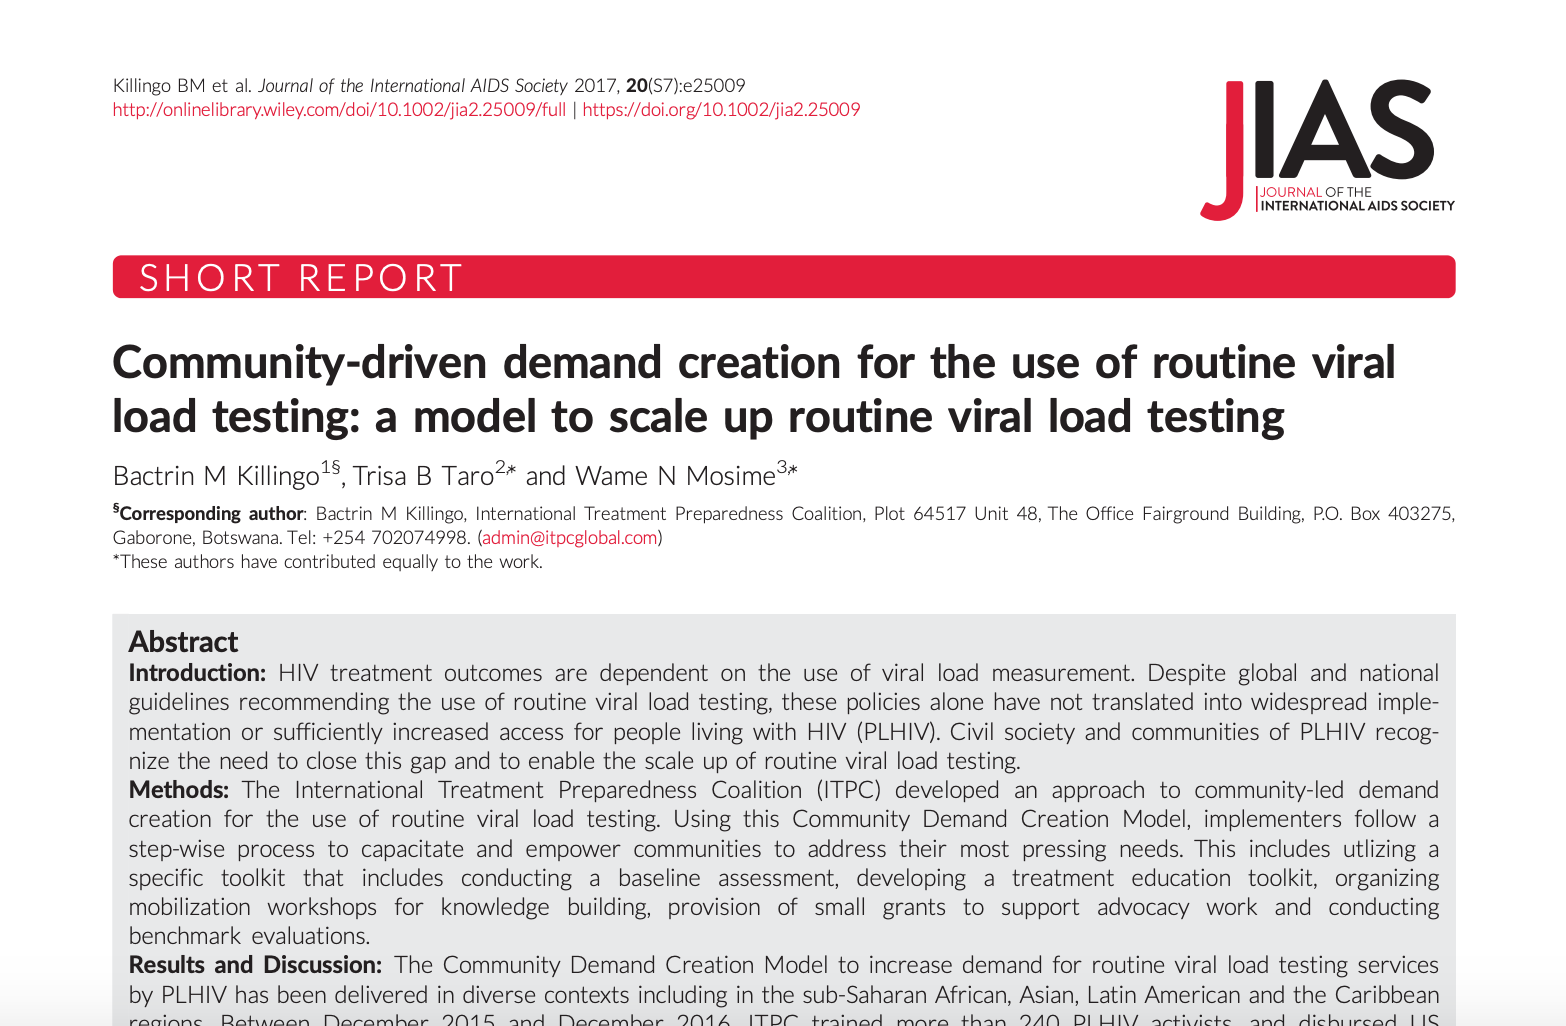 Community Demand Creation Model for Routine Viral Load Testing